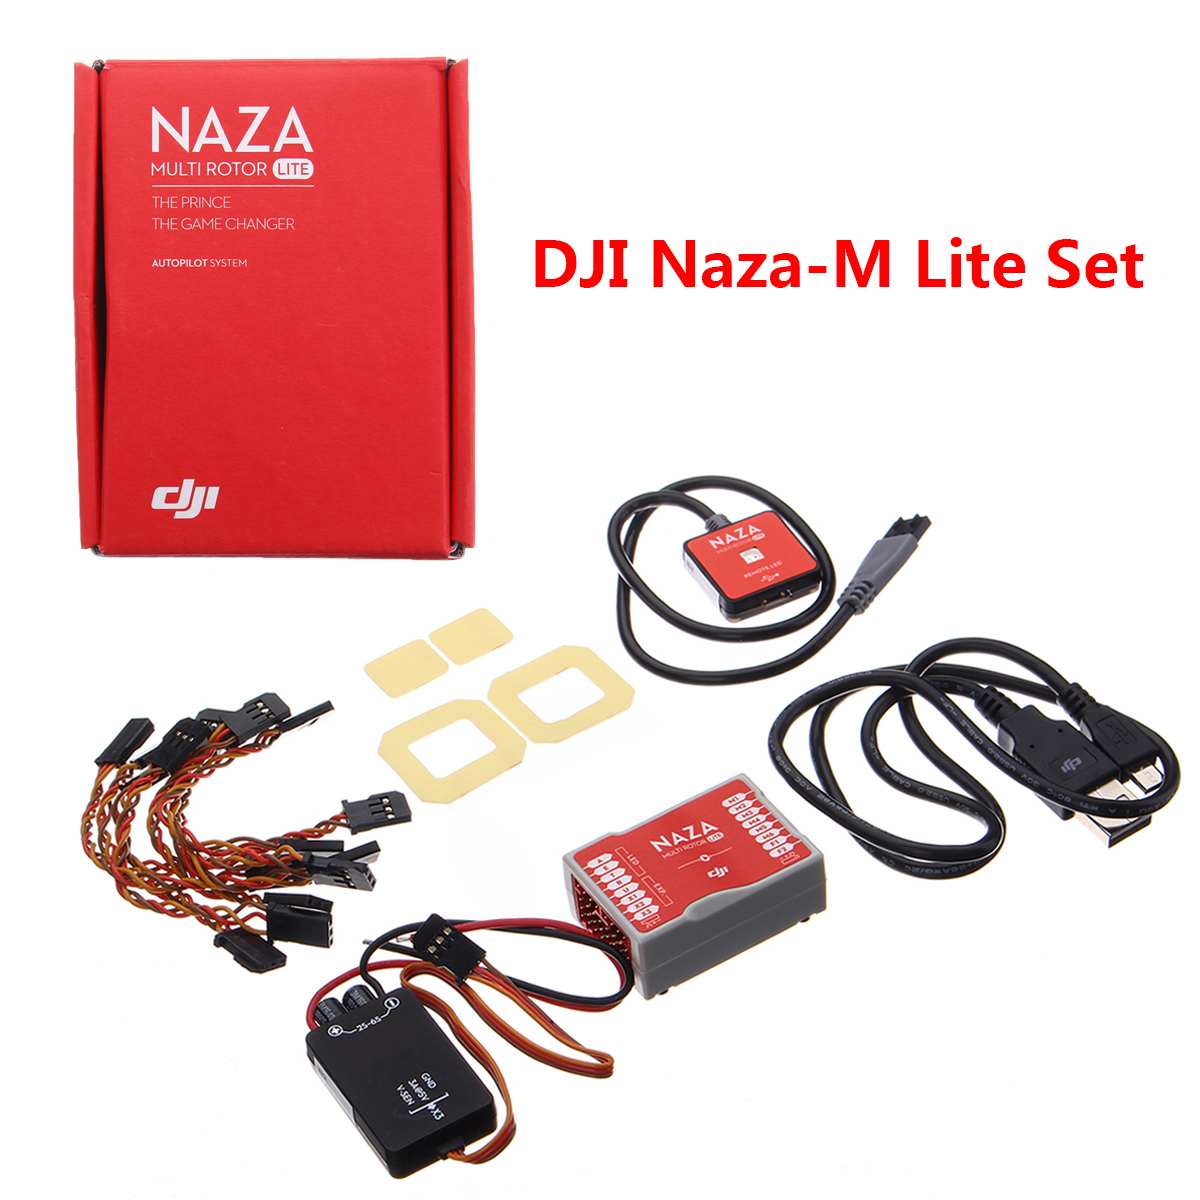 For DJI Naza M Lite Flight Controller Sets Multi-Rotor Flight (Automatic)Control Combo for RC System Quadcopter Accessorie kits